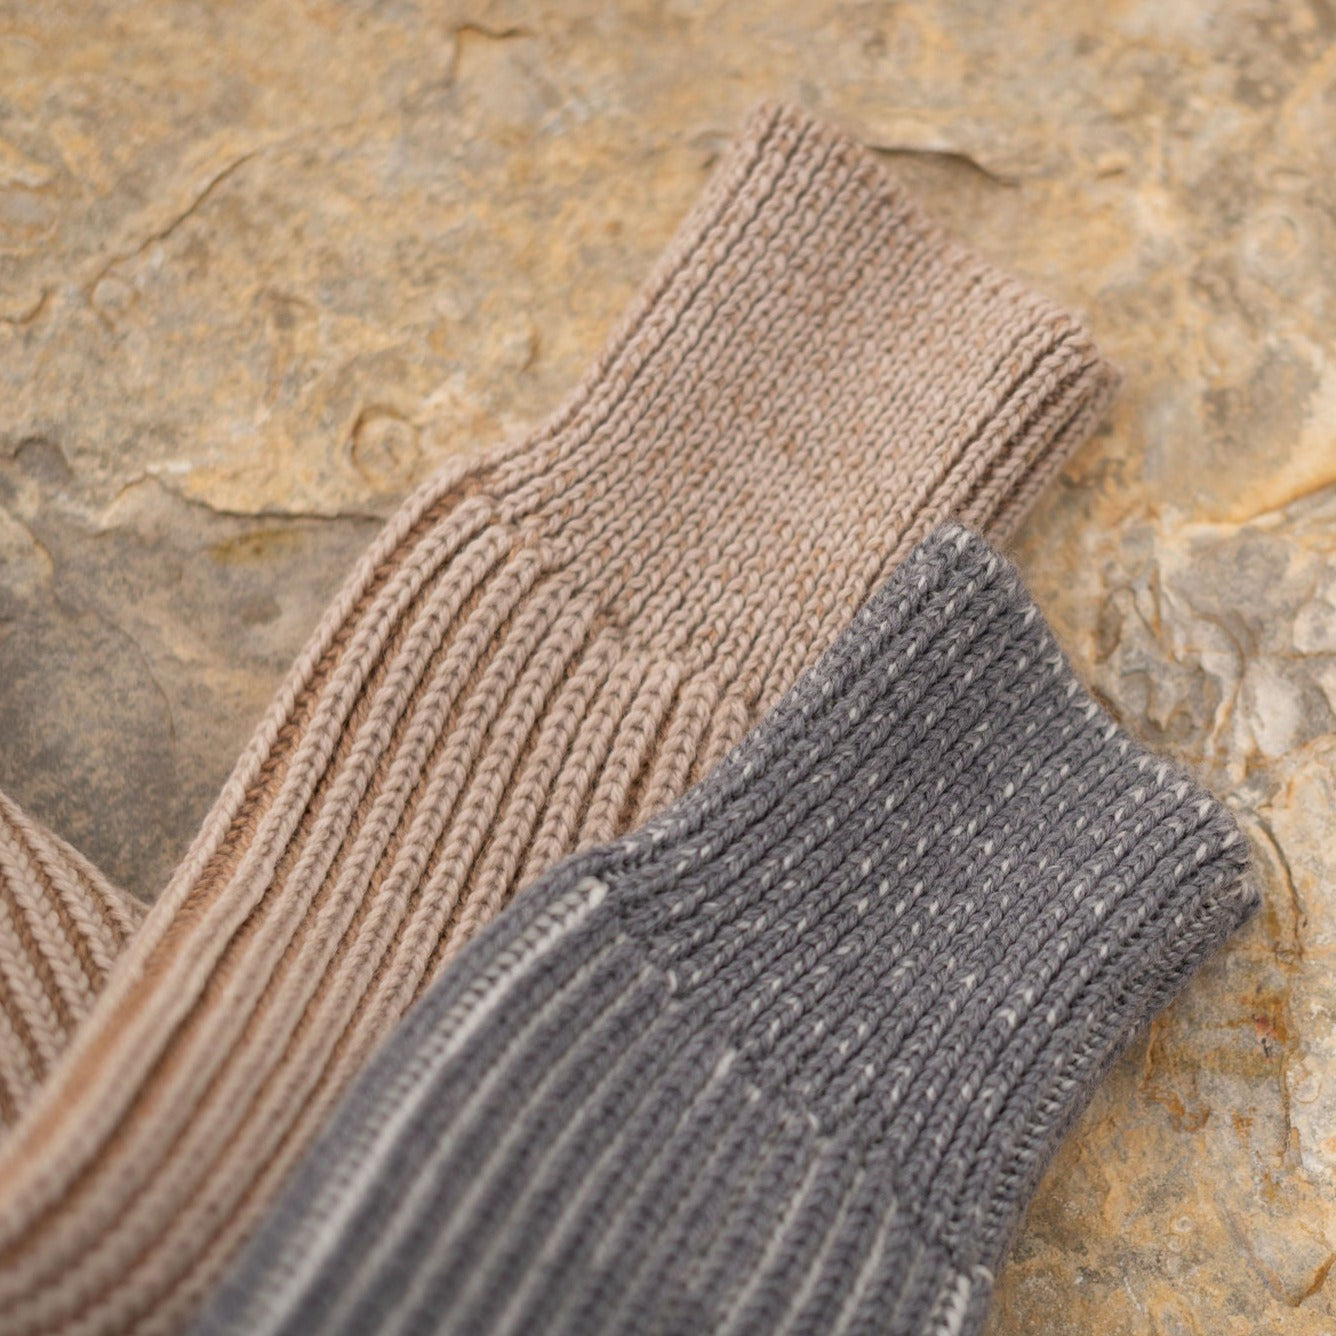 The Mesa Merino Wool Sweater is soft and cozy, crafted in a slightly boxy cropped silhouette.  The two-toned fisherman rib design adds unique texture and style     Details  100% merino wool  Cropped fit  Turtleneck  Raglan sleeve  Ribbed cuff  Made in the USA